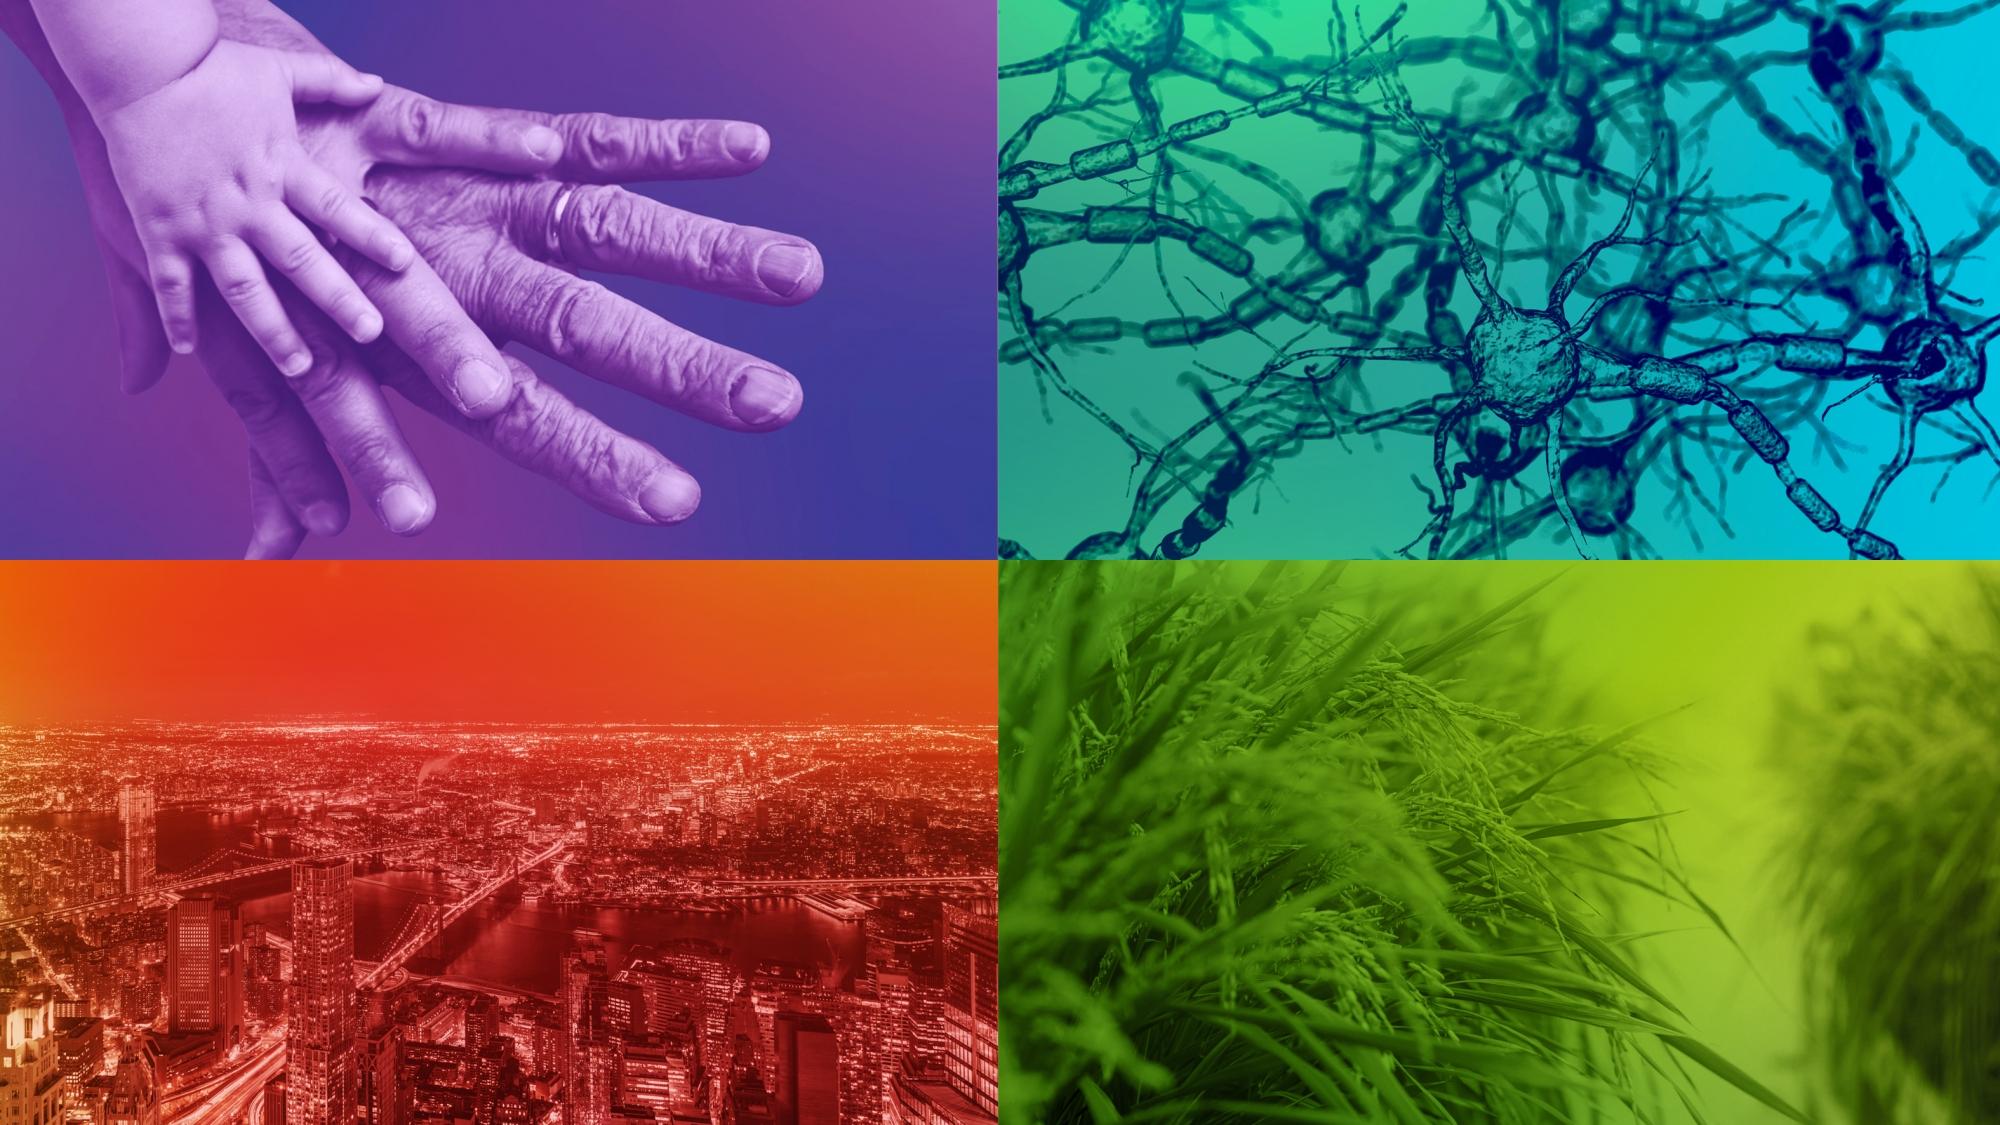 Collage of four images - hands, neurons, a cityscape and plants